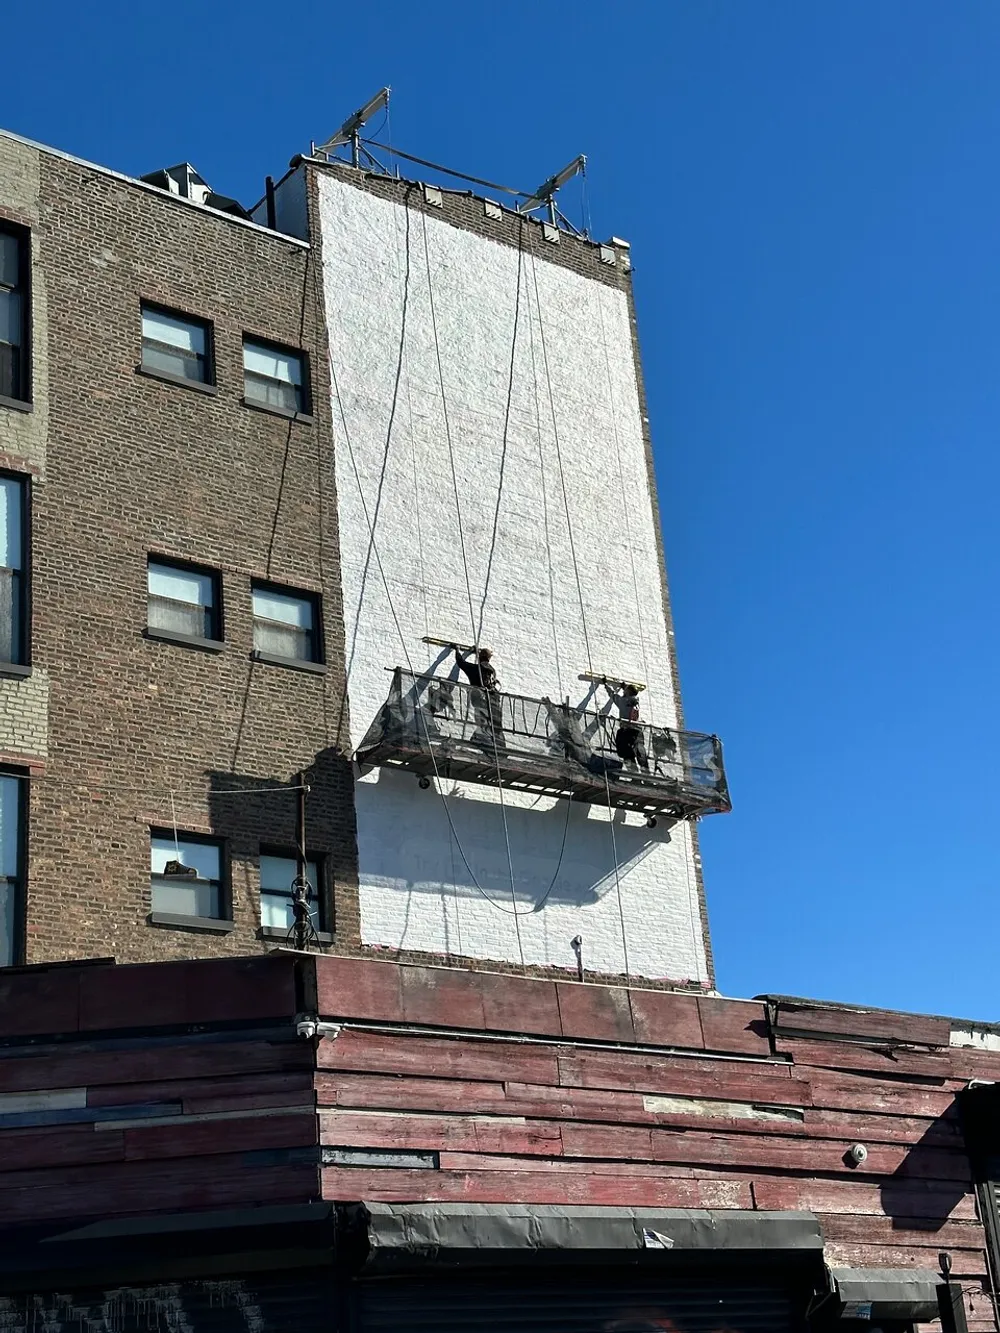 A suspended platform with workers is hanging on the side of a brick building possibly for maintenance or construction purposes against a blue sky background